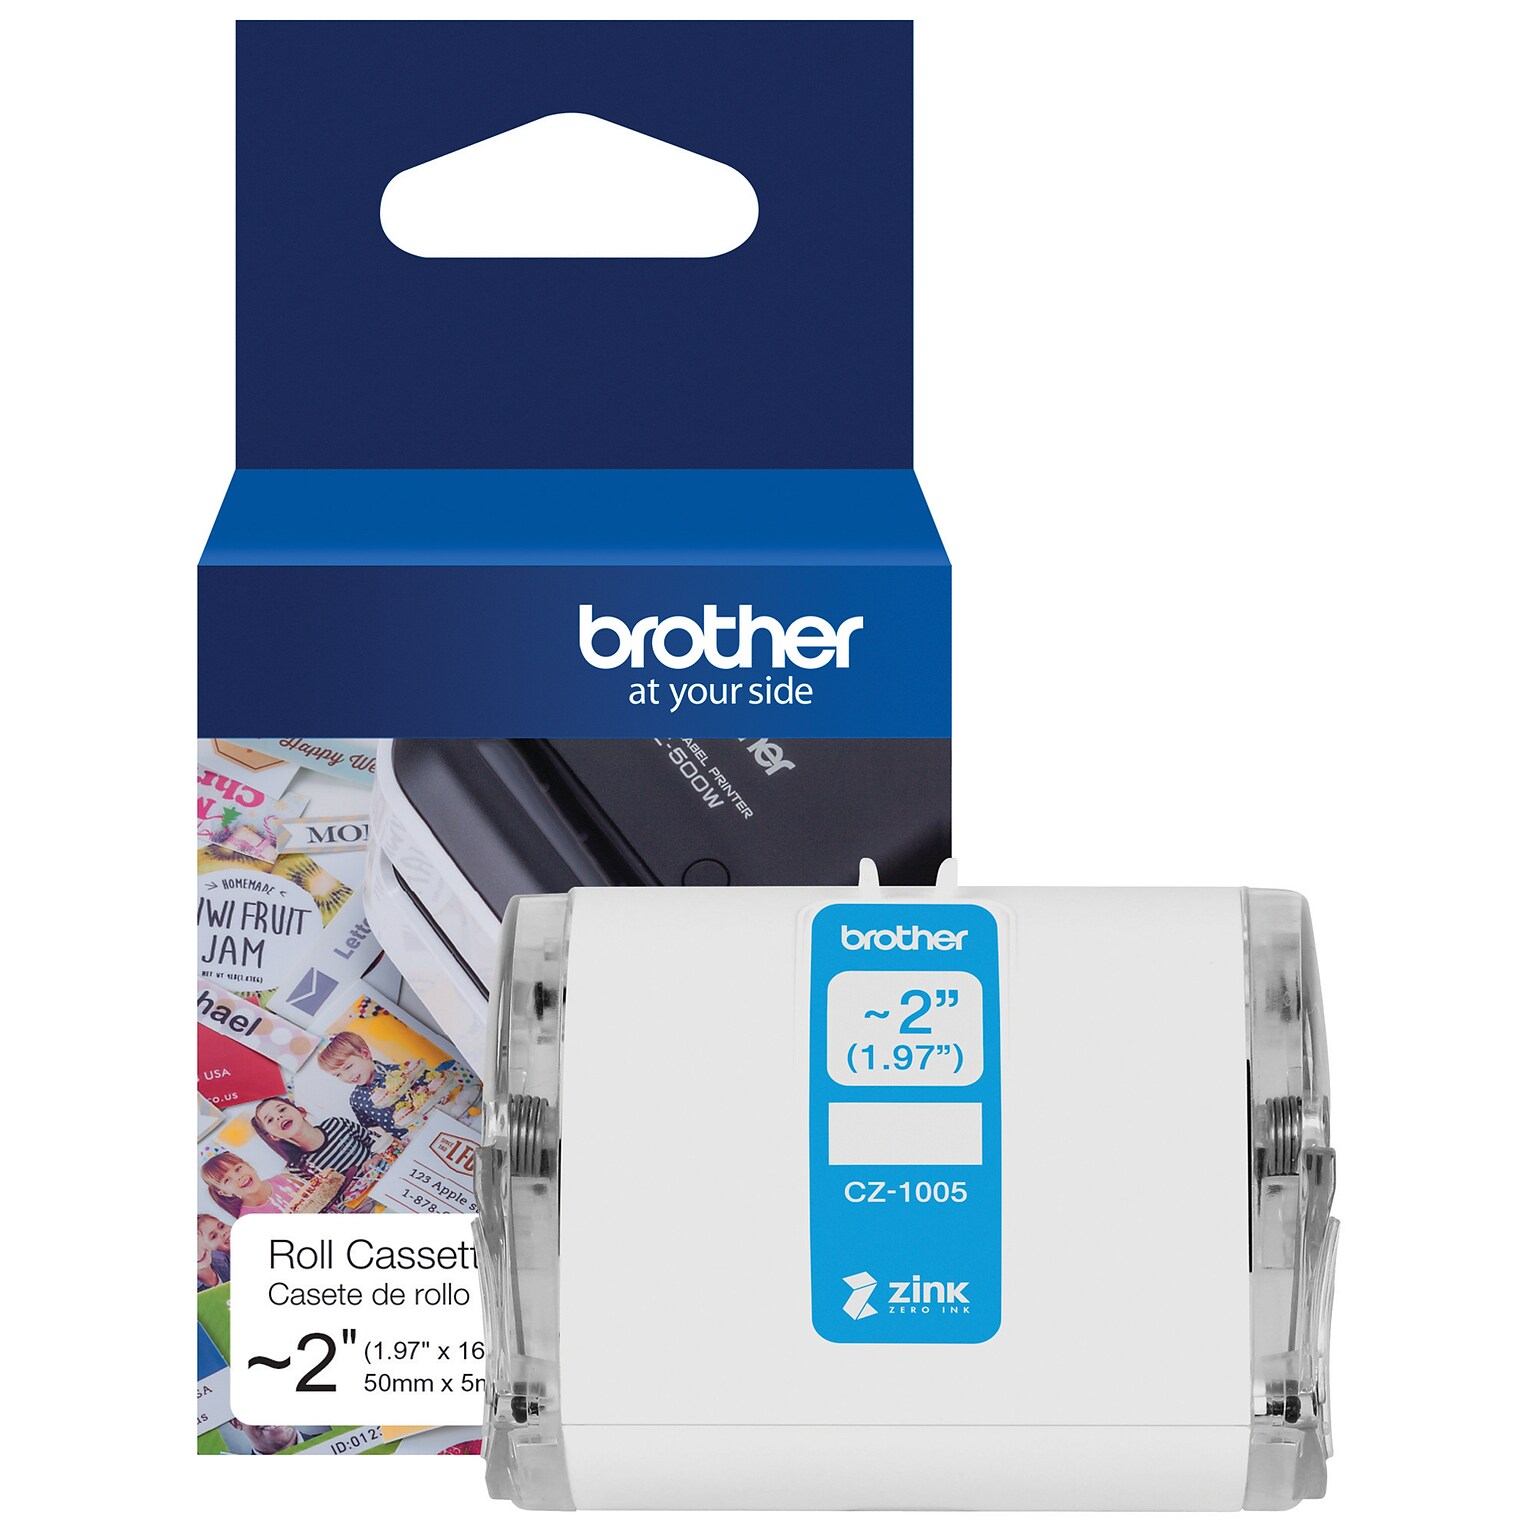 Brother CZ-1005 Continuous Paper Label Roll with ZINK® Zero Ink technology, 2 x 16-4/10, Multicolored (CZ-1005)